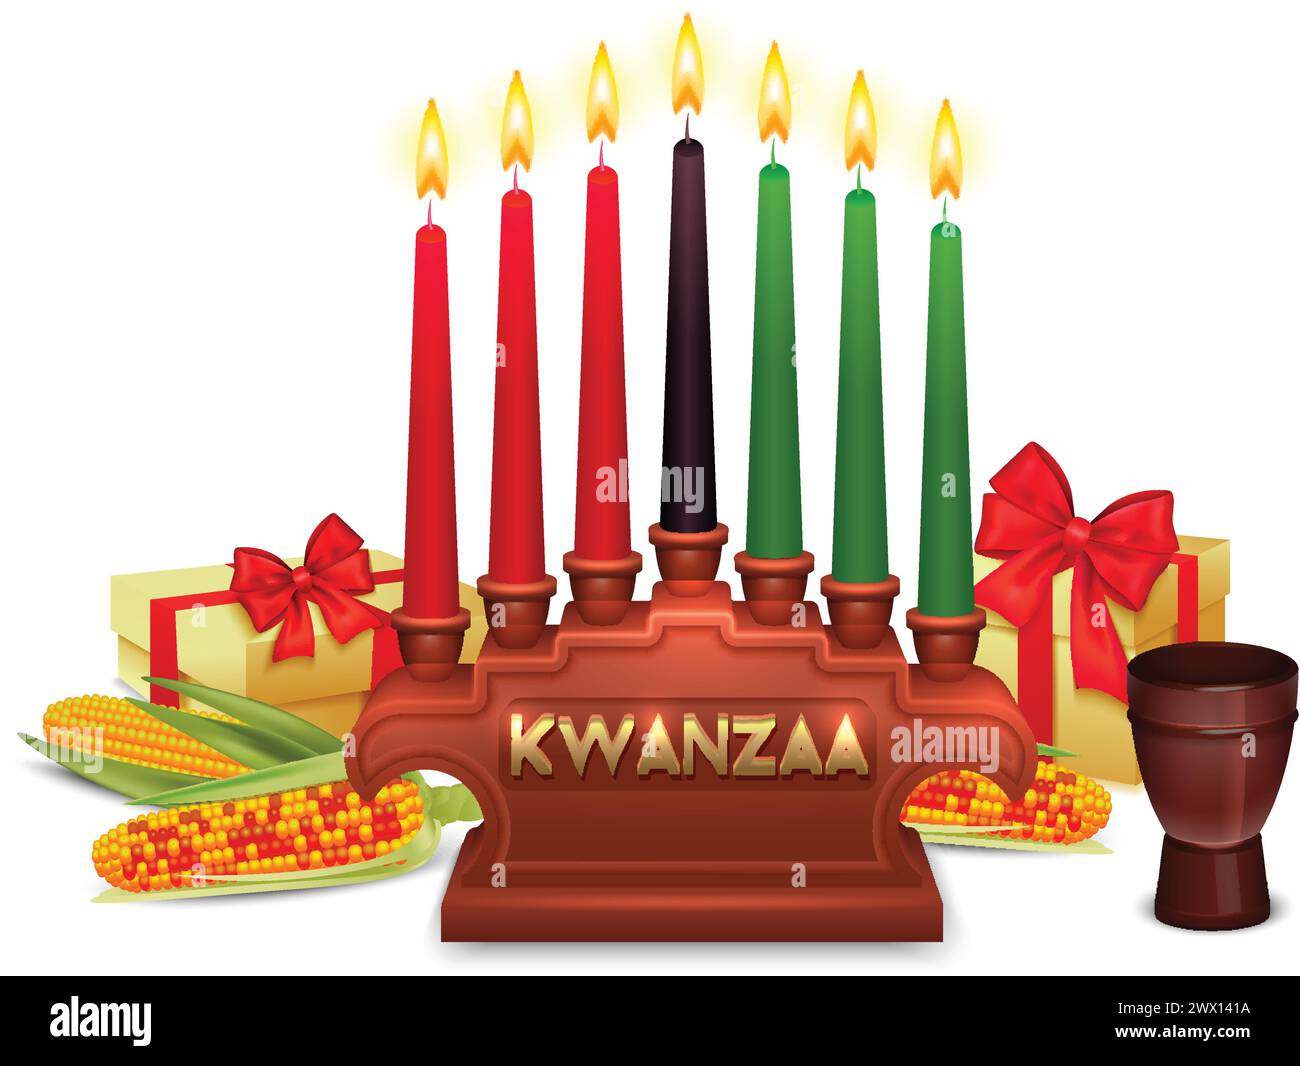 African americans kwanzaa holiday symbols composition poster with candles holder traditional presents corn ears and colors vector illustration Stock Vector